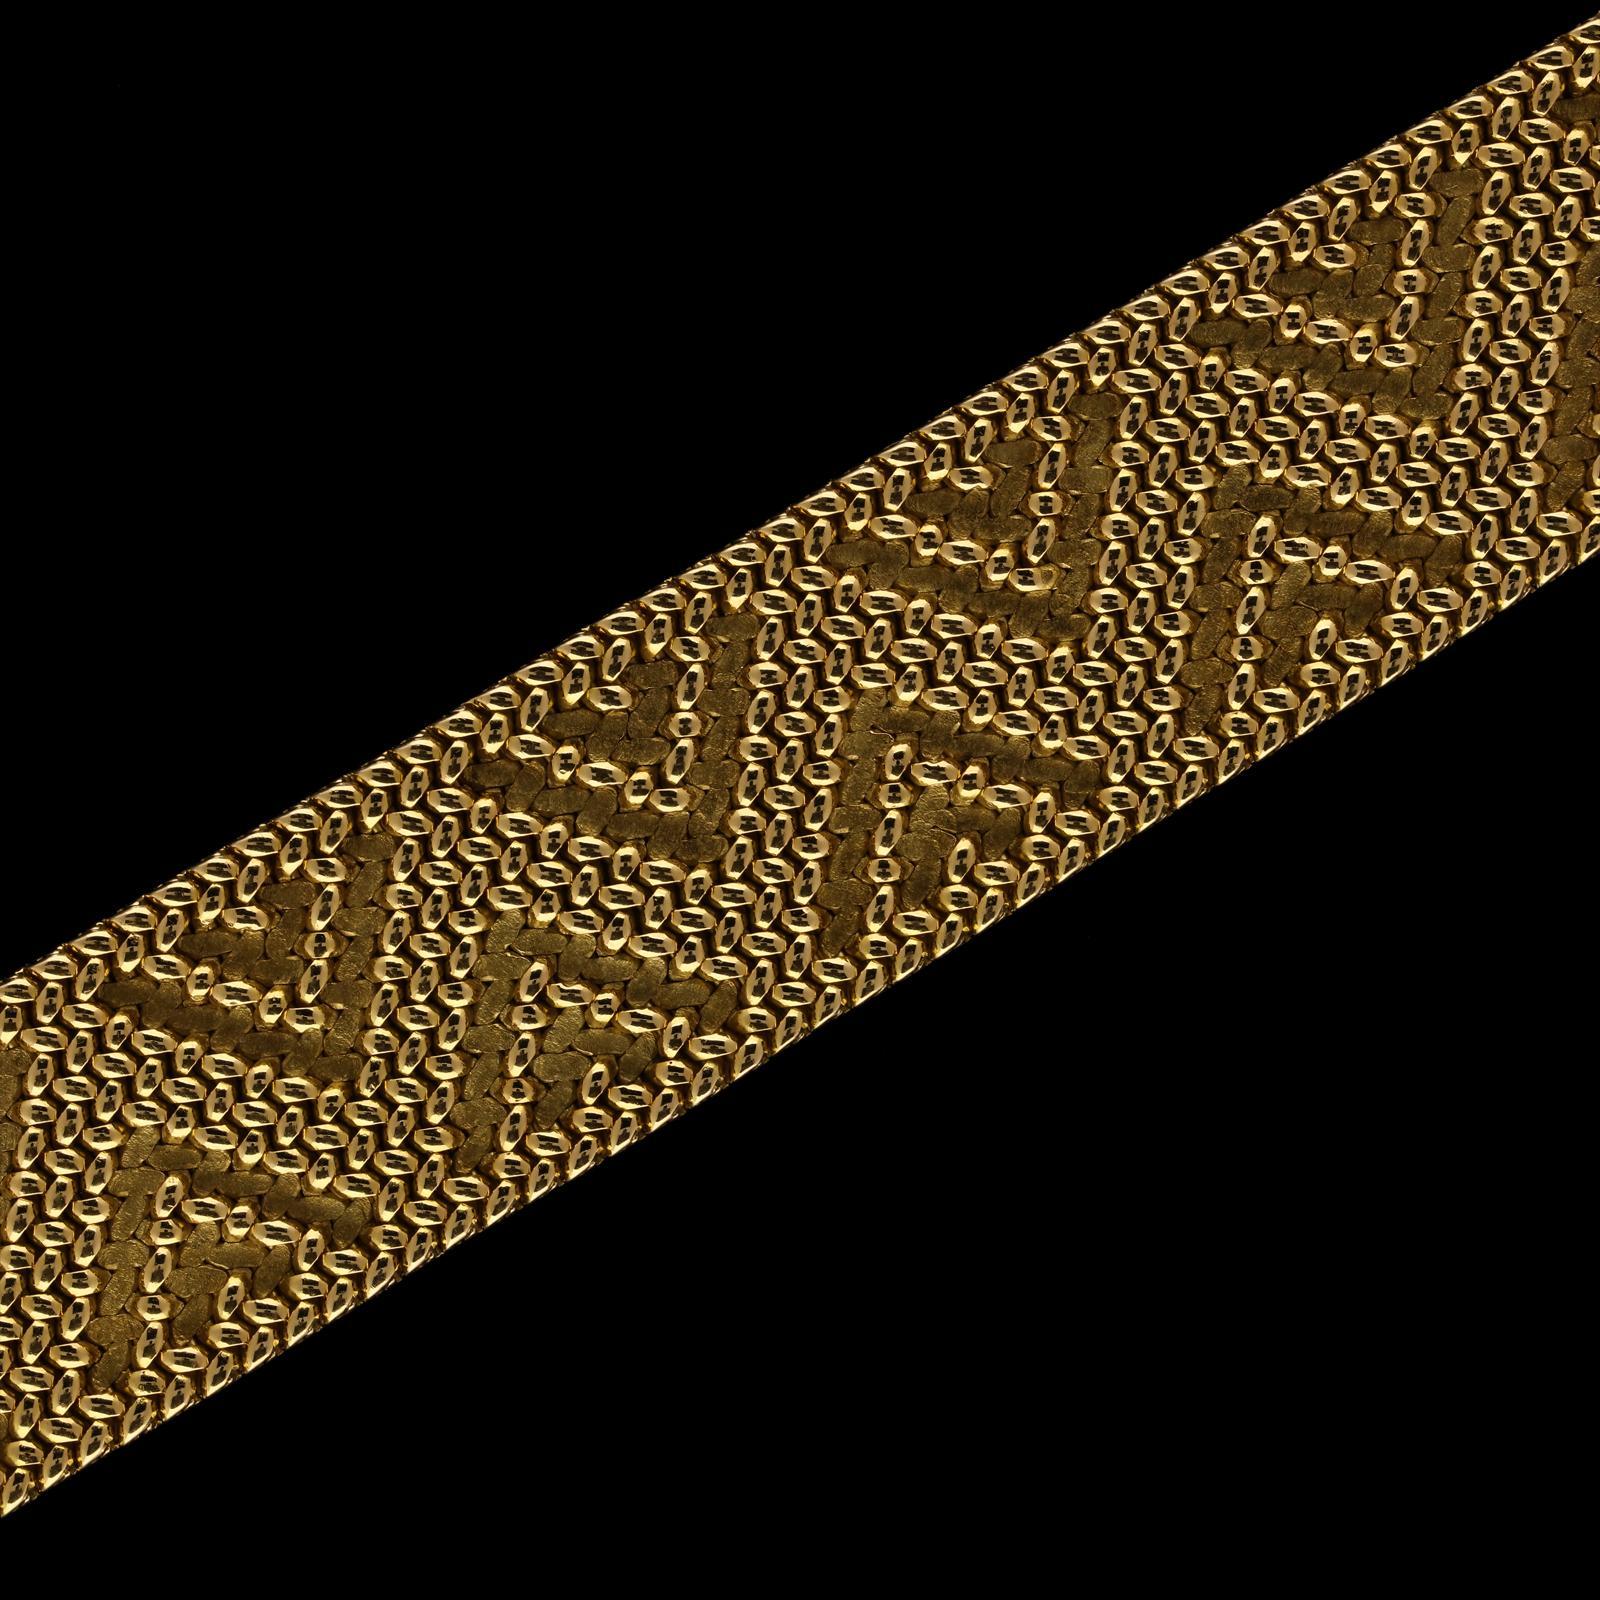 Contemporary Vintage 18ct Gold Strap Bracelet with Textured ZigZag Pattern by Marchak c.1970s